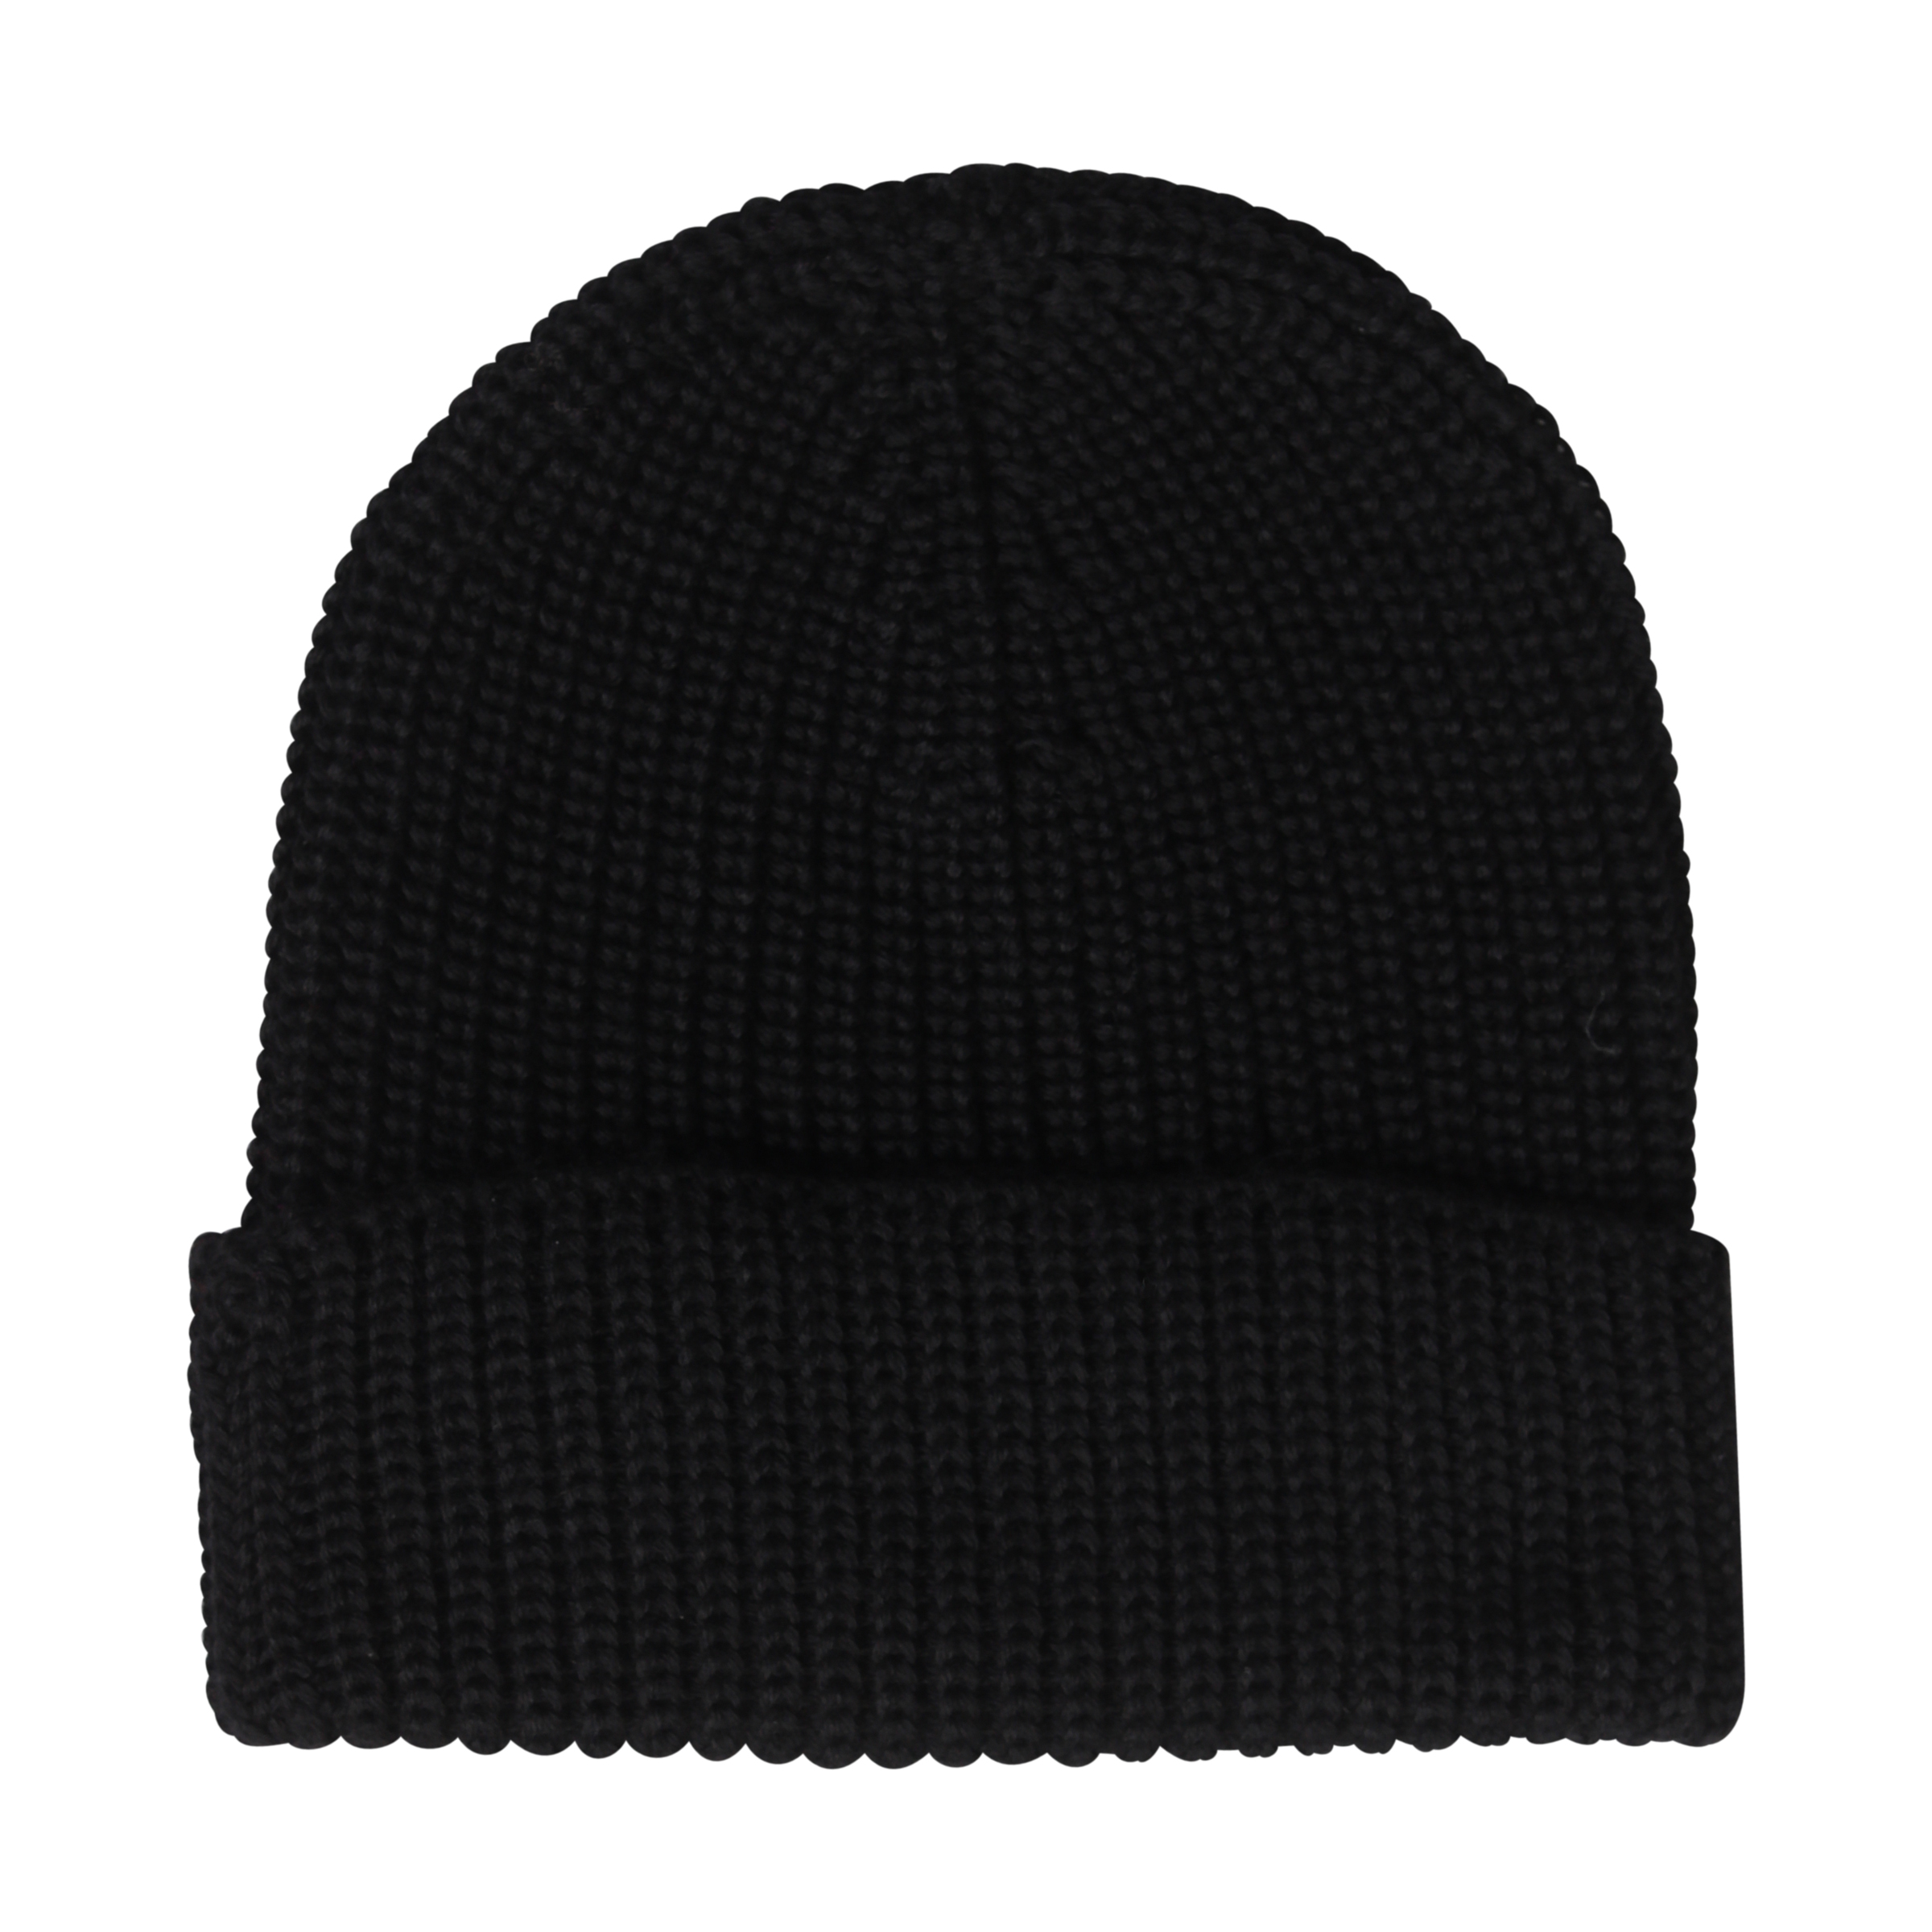 HANNES ROETHER Knit Beanie in Black